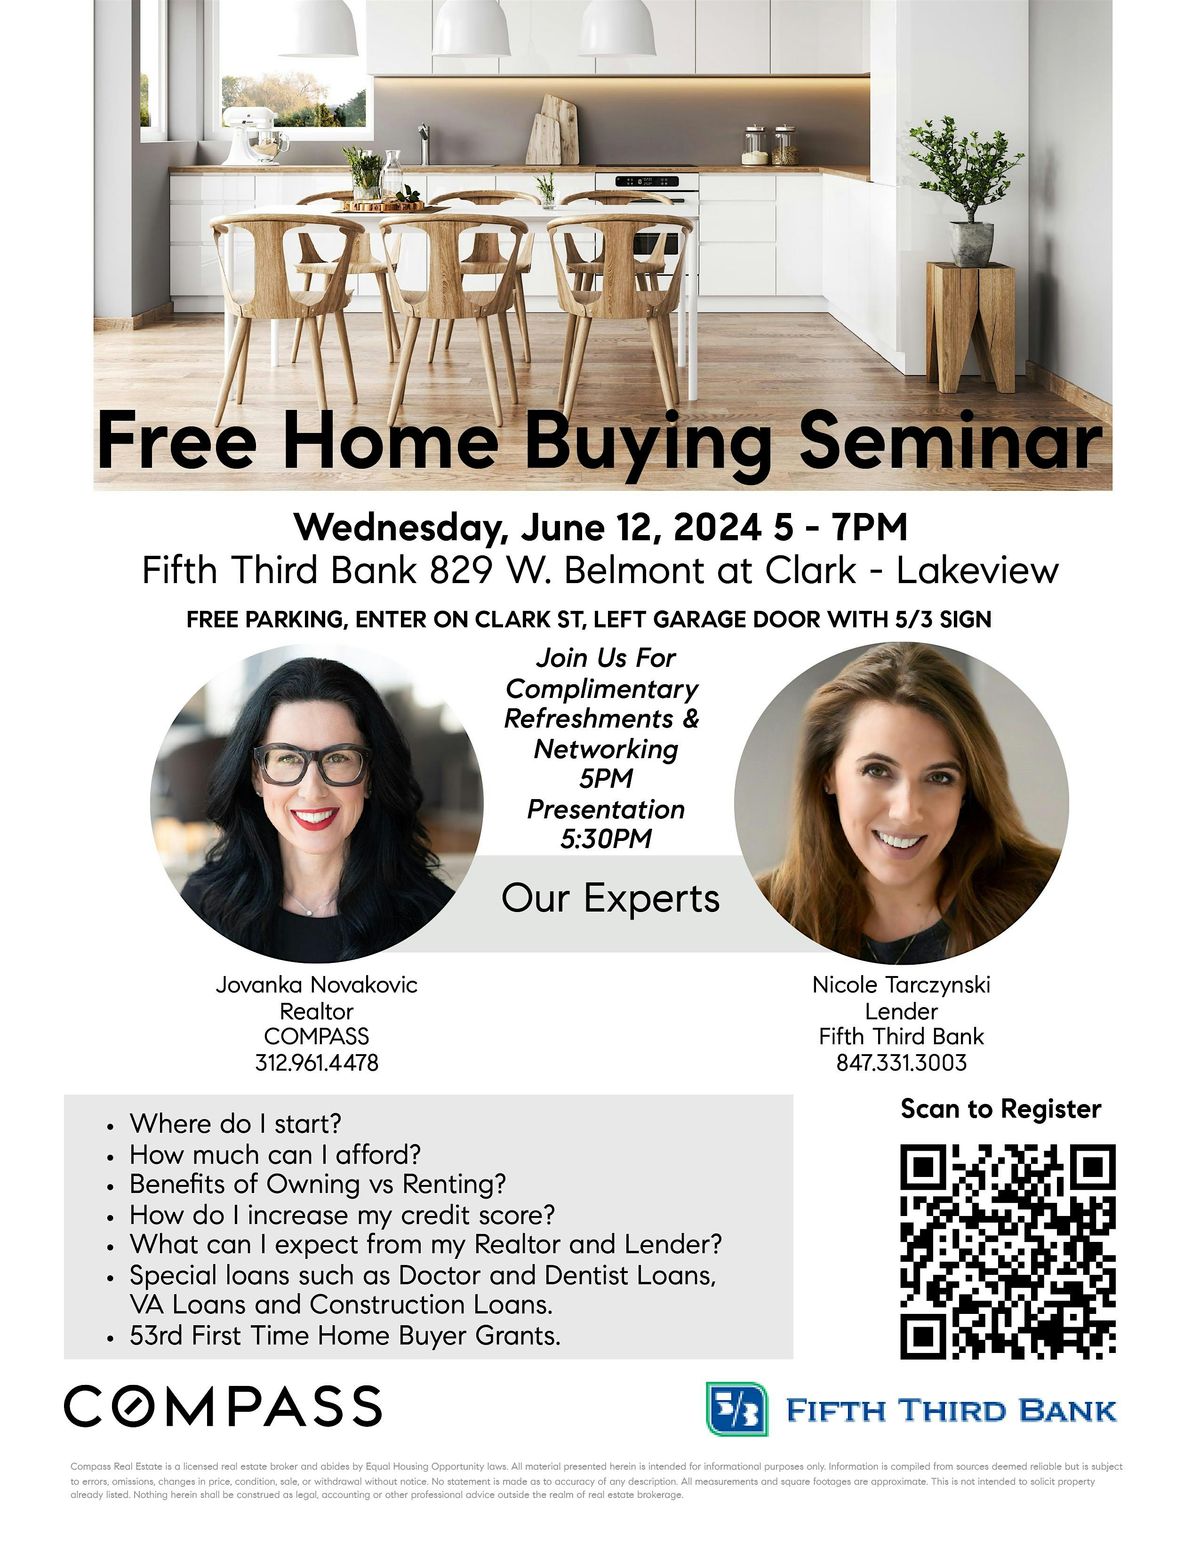 Free Home Buying Seminar in Lakeview, Chicago June 12, 2024